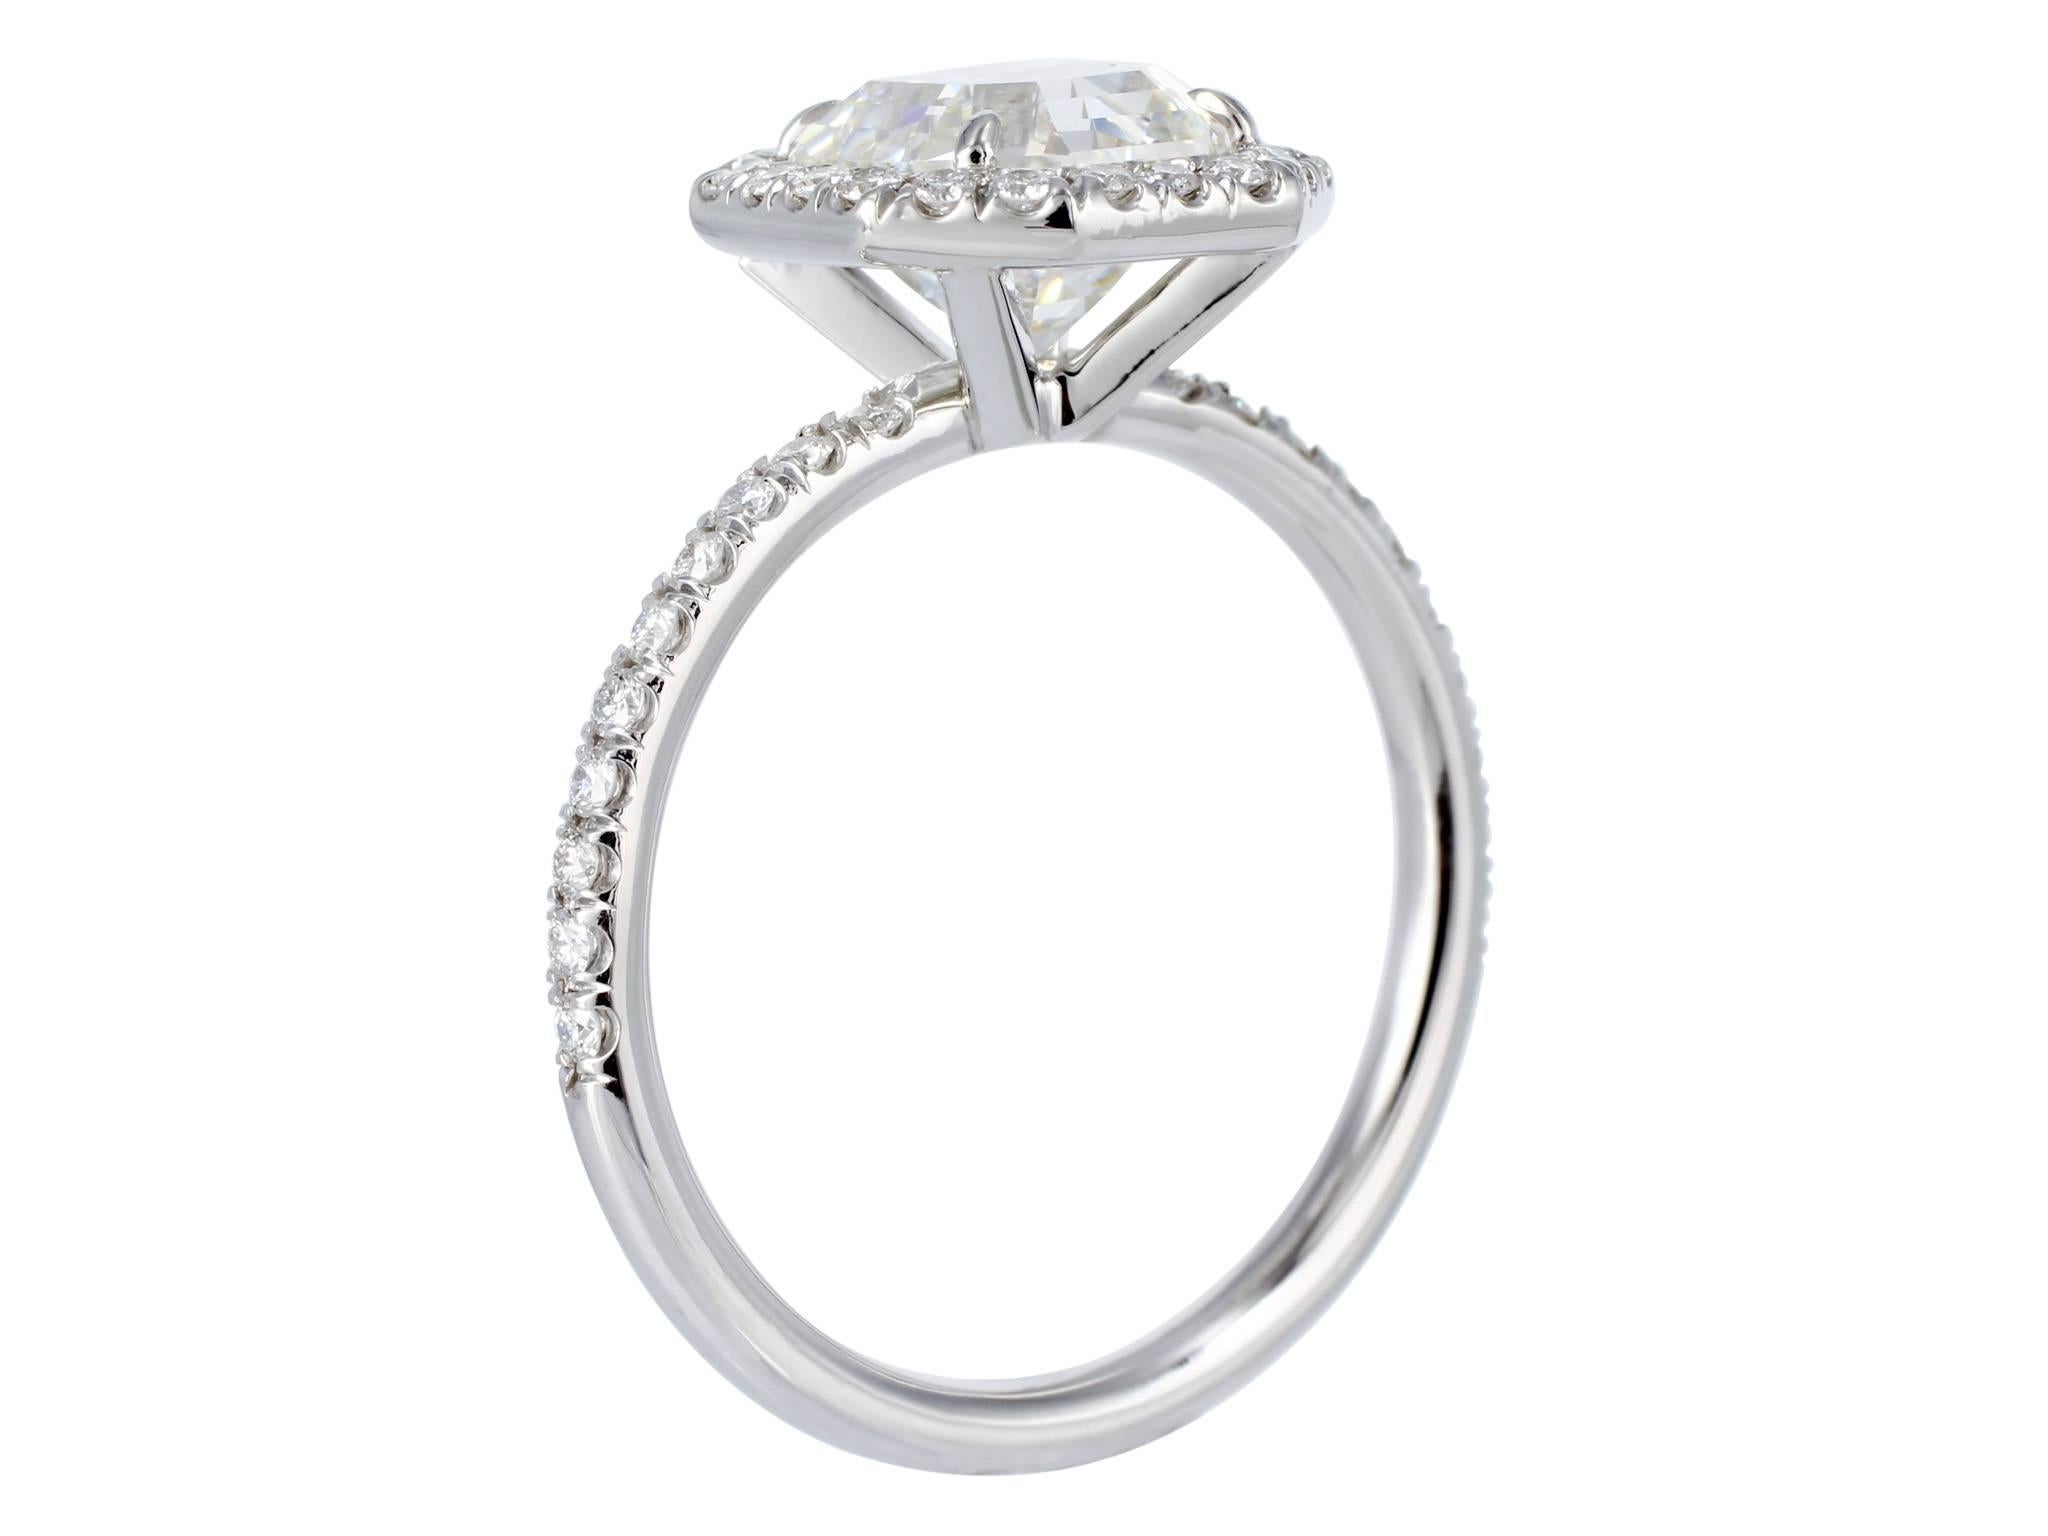 2.37 Carat GIA Certificate Asscher Cut Diamond Platinum Halo Ring In Excellent Condition For Sale In Chestnut Hill, MA